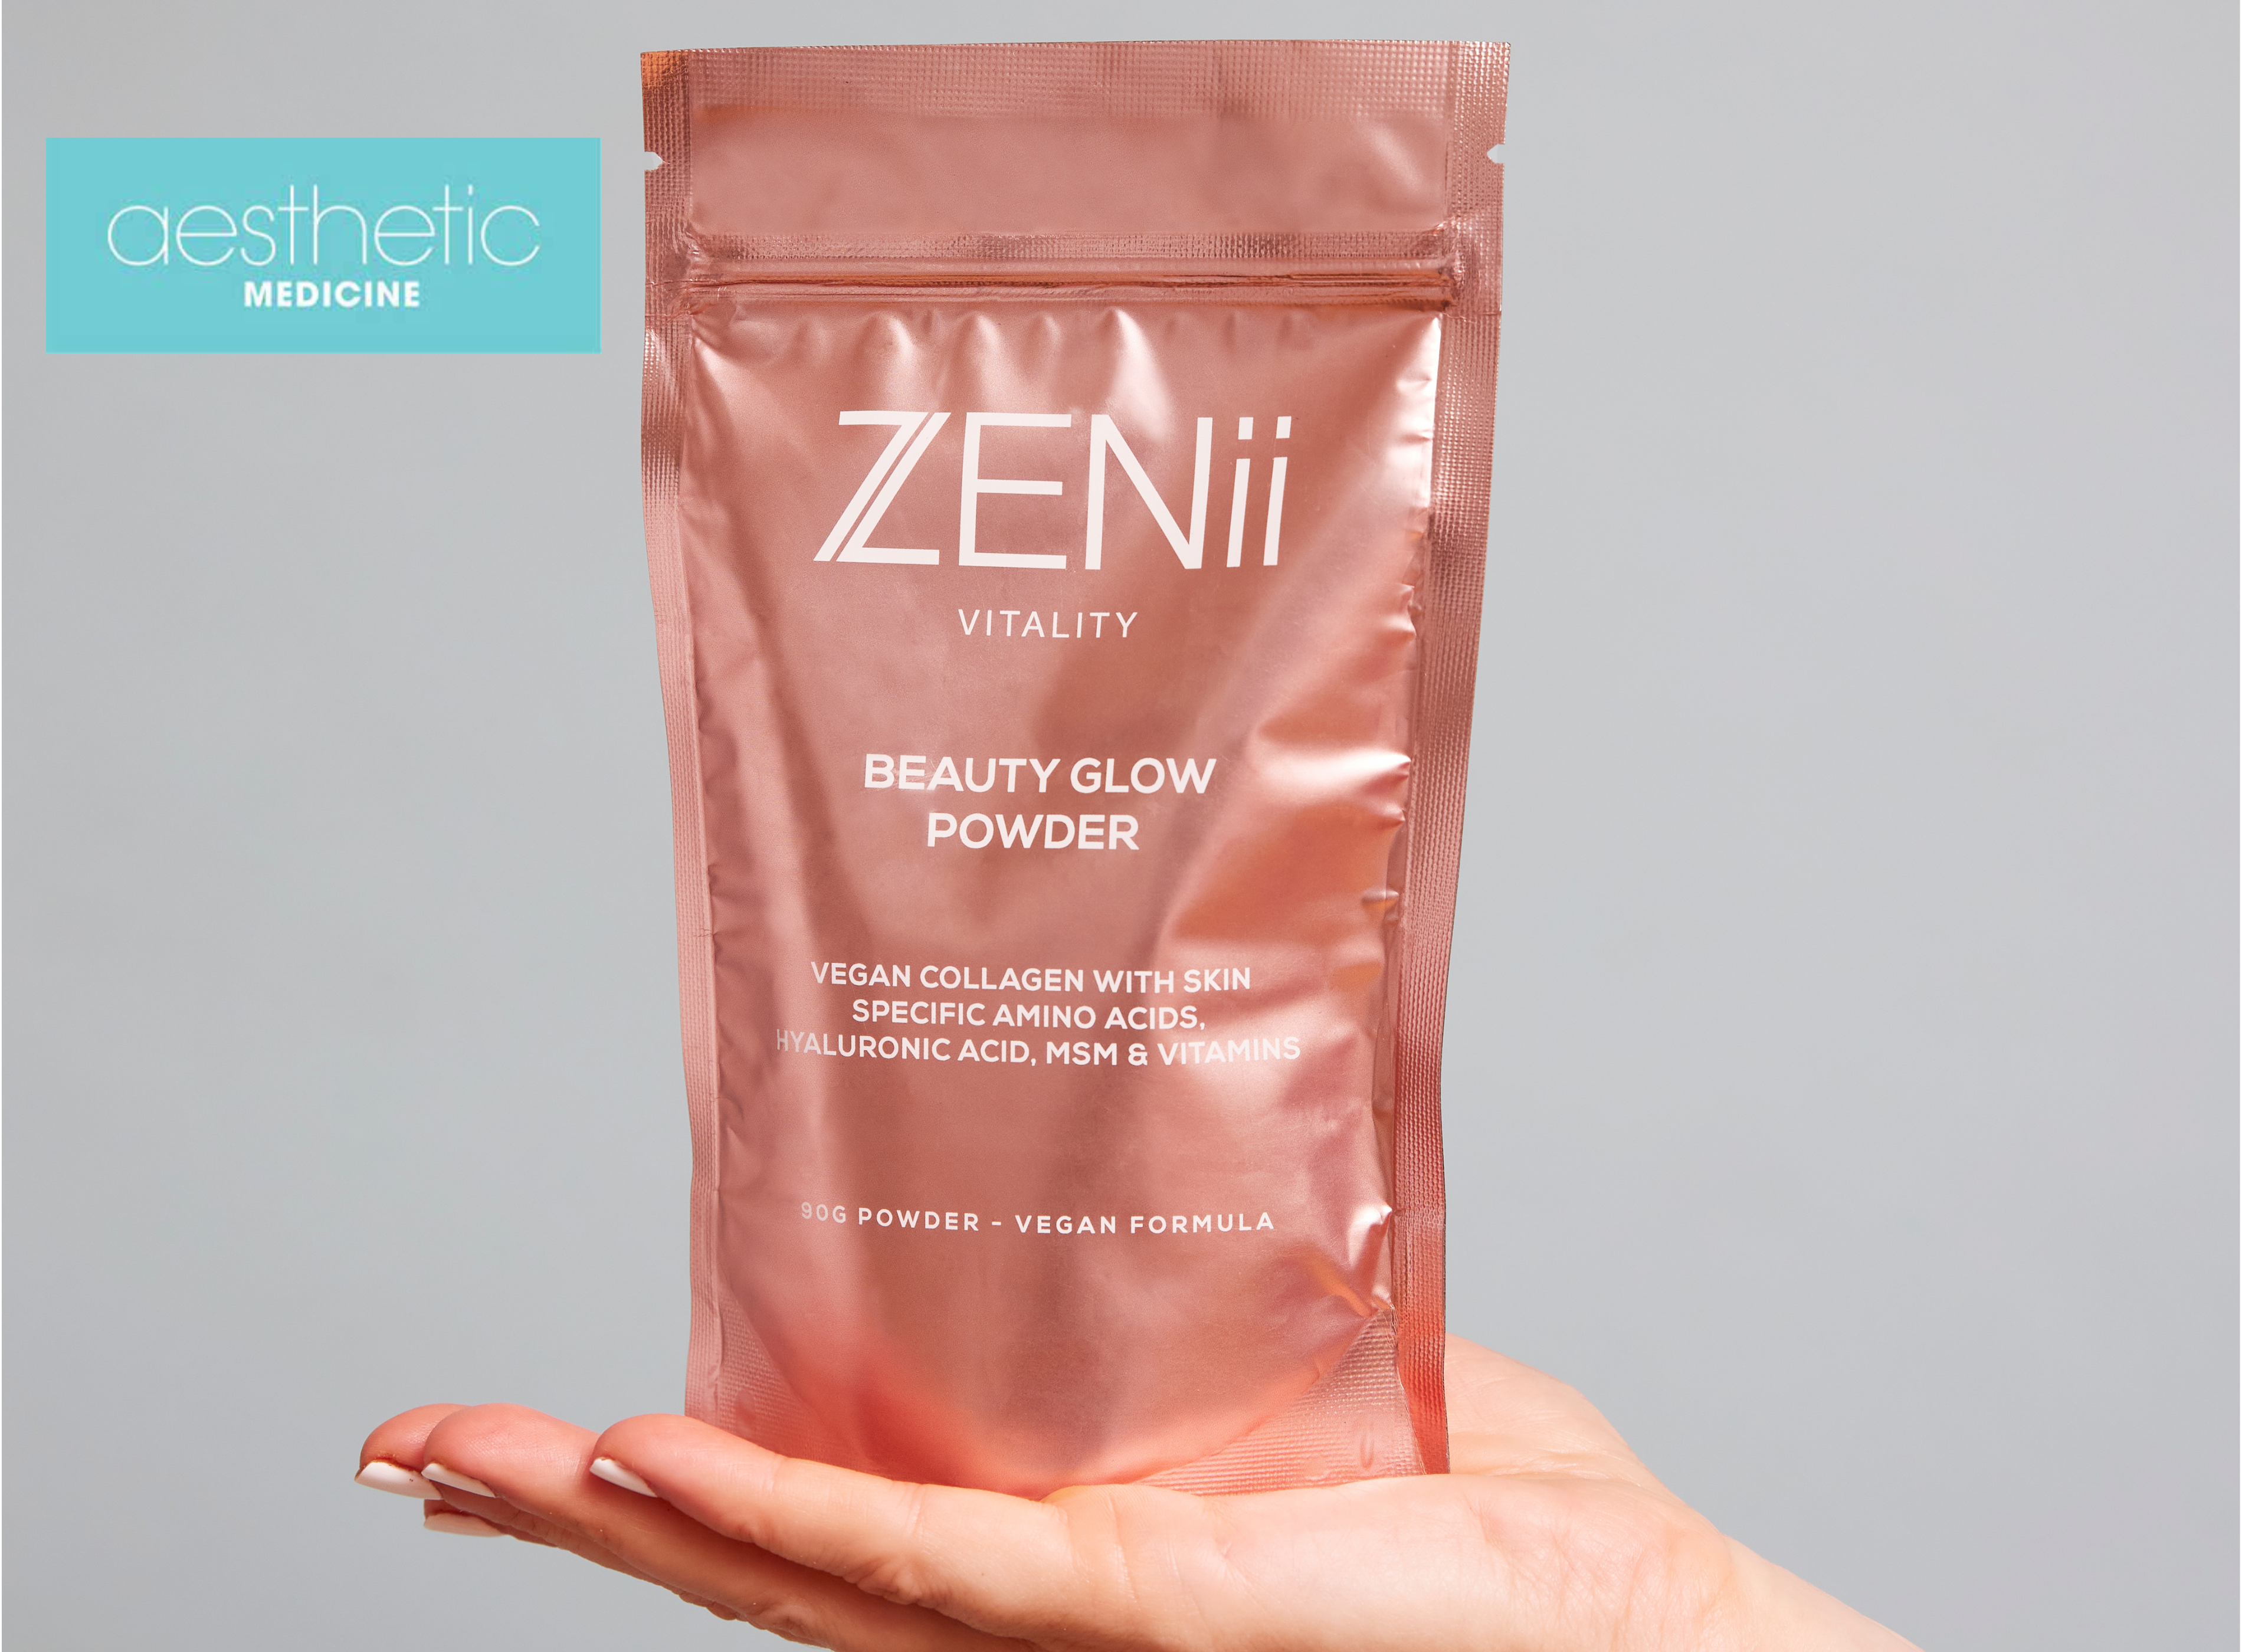 Beauty Glow - Featured in Aesthetic Medicine